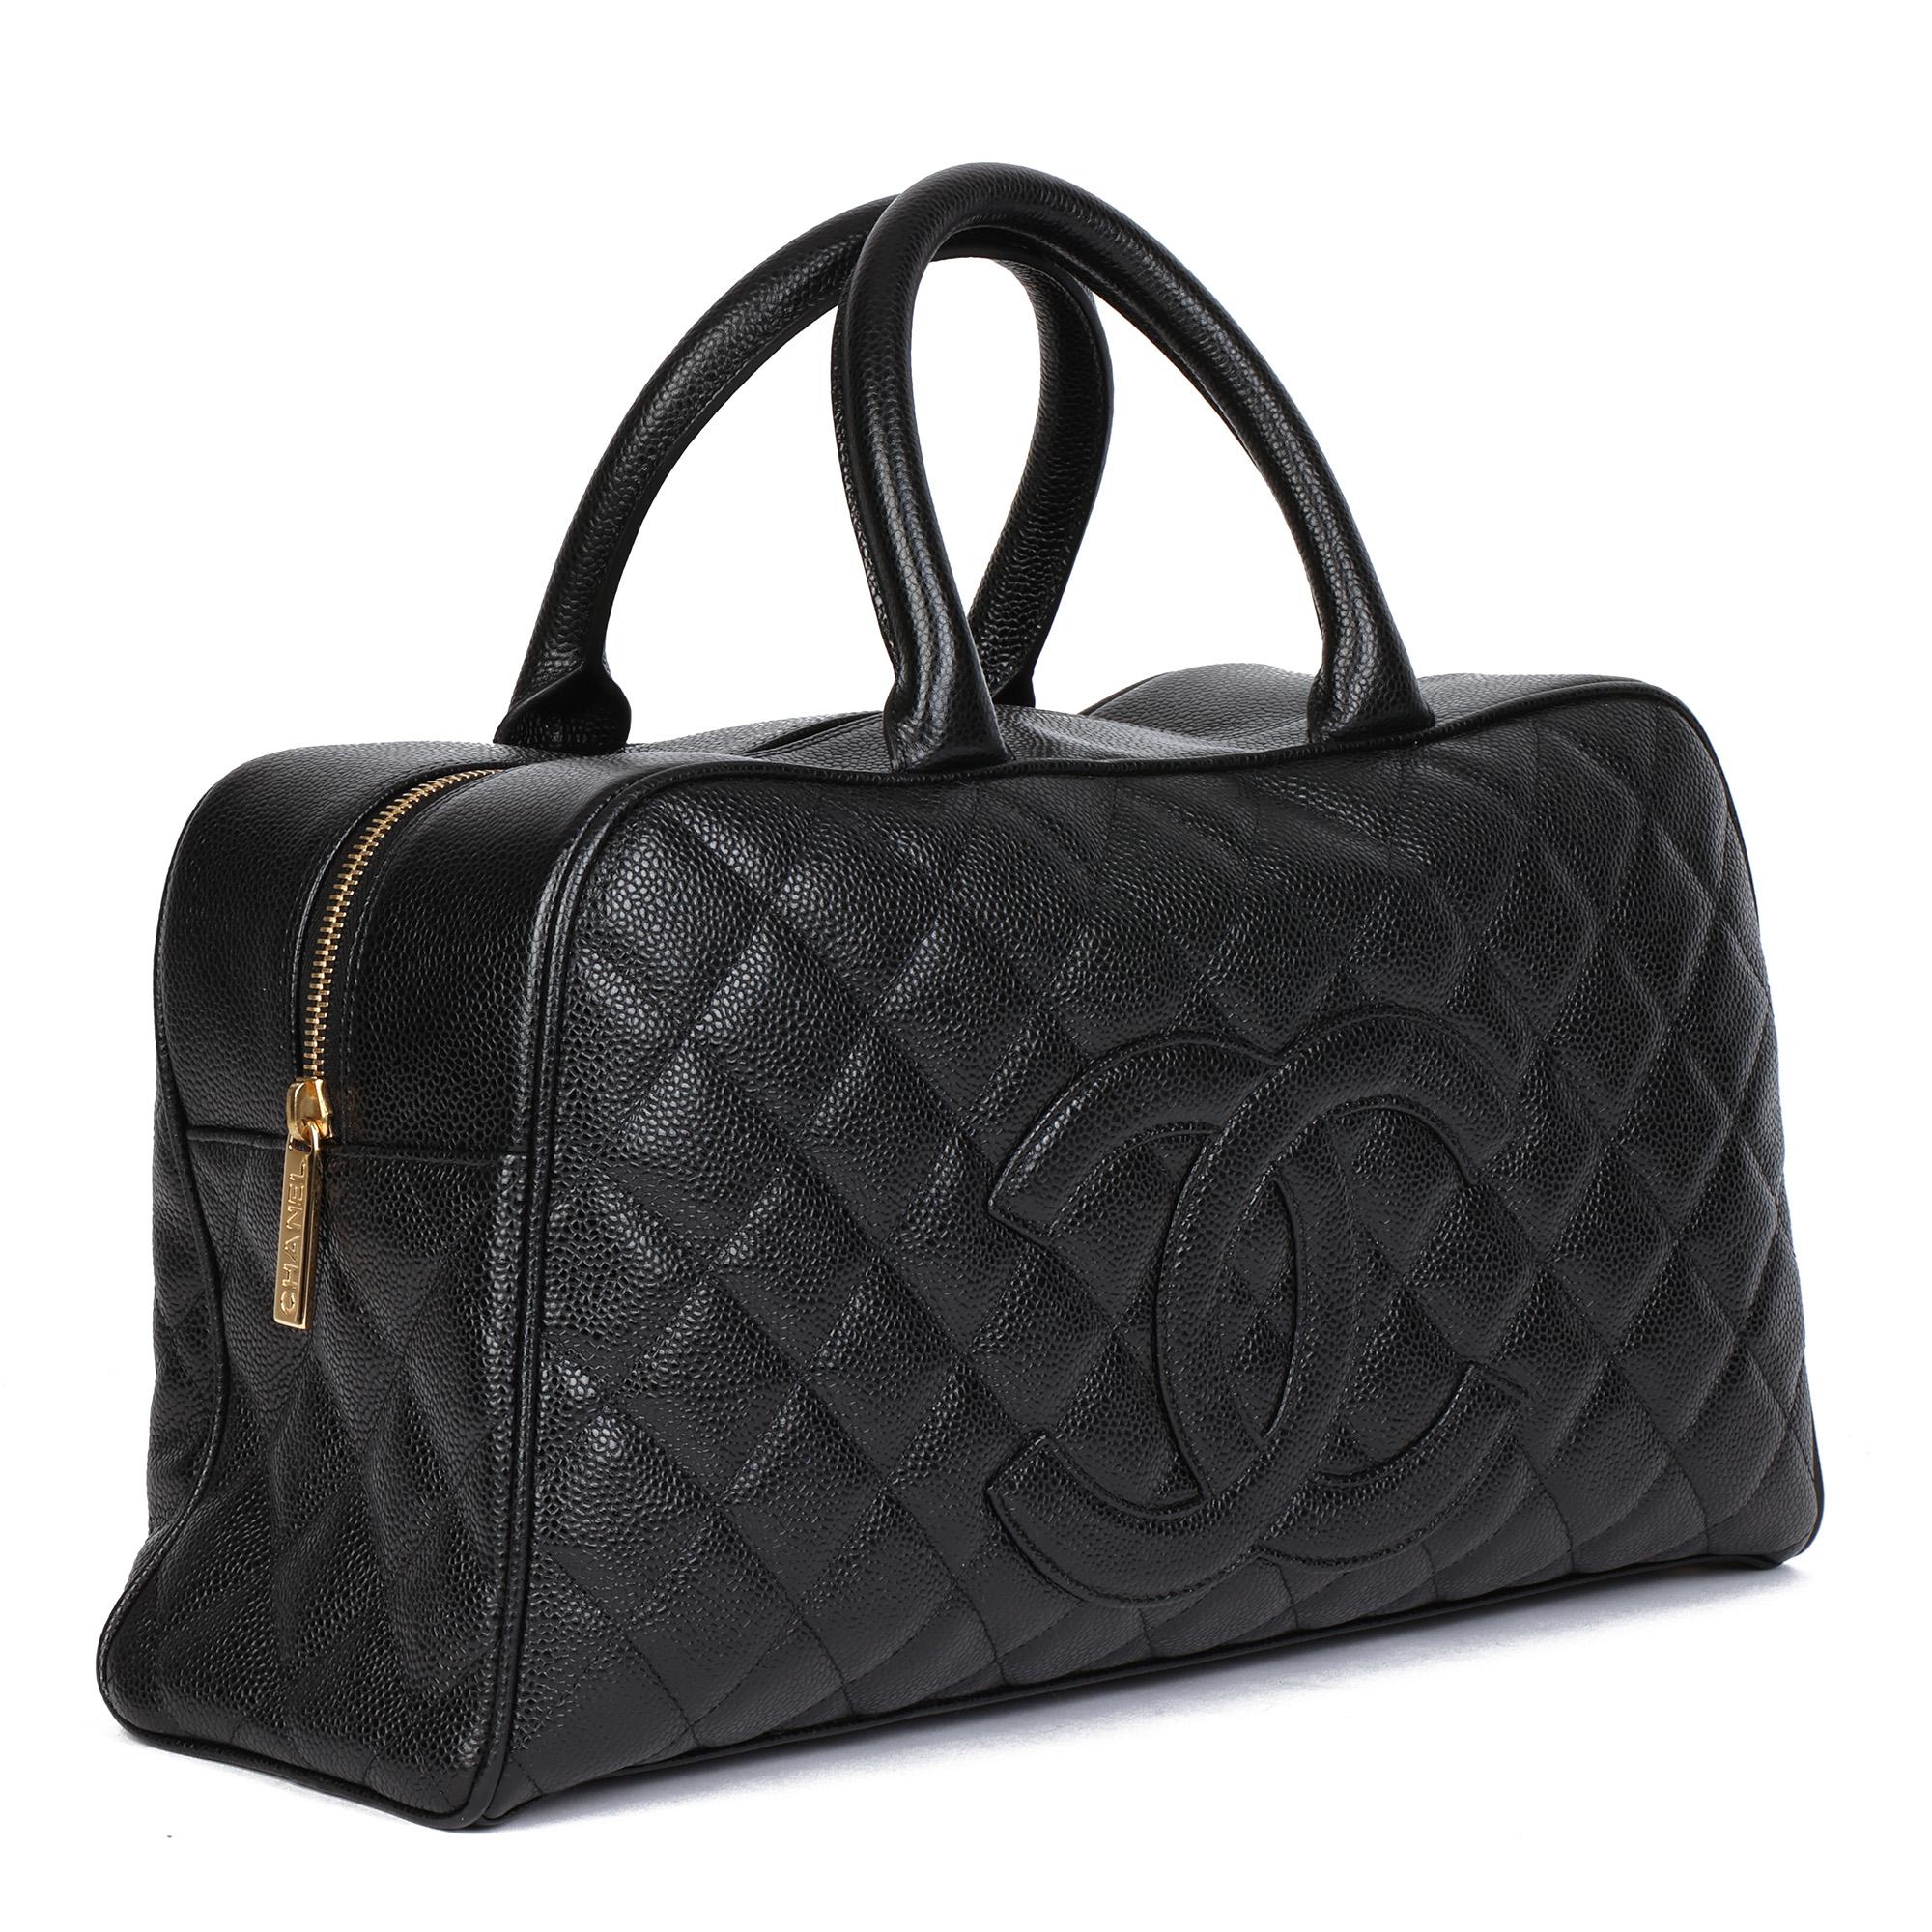 CHANEL
Black Quilted Caviar Leather Boston

Xupes Reference: HB4545
Serial Number: 8538369
Age (Circa): 2003
Accompanied By: Chanel Dust Bag, Authenticity Card, Care Booklet
Authenticity Details: Authenticity Card, Serial Sticker (Made in